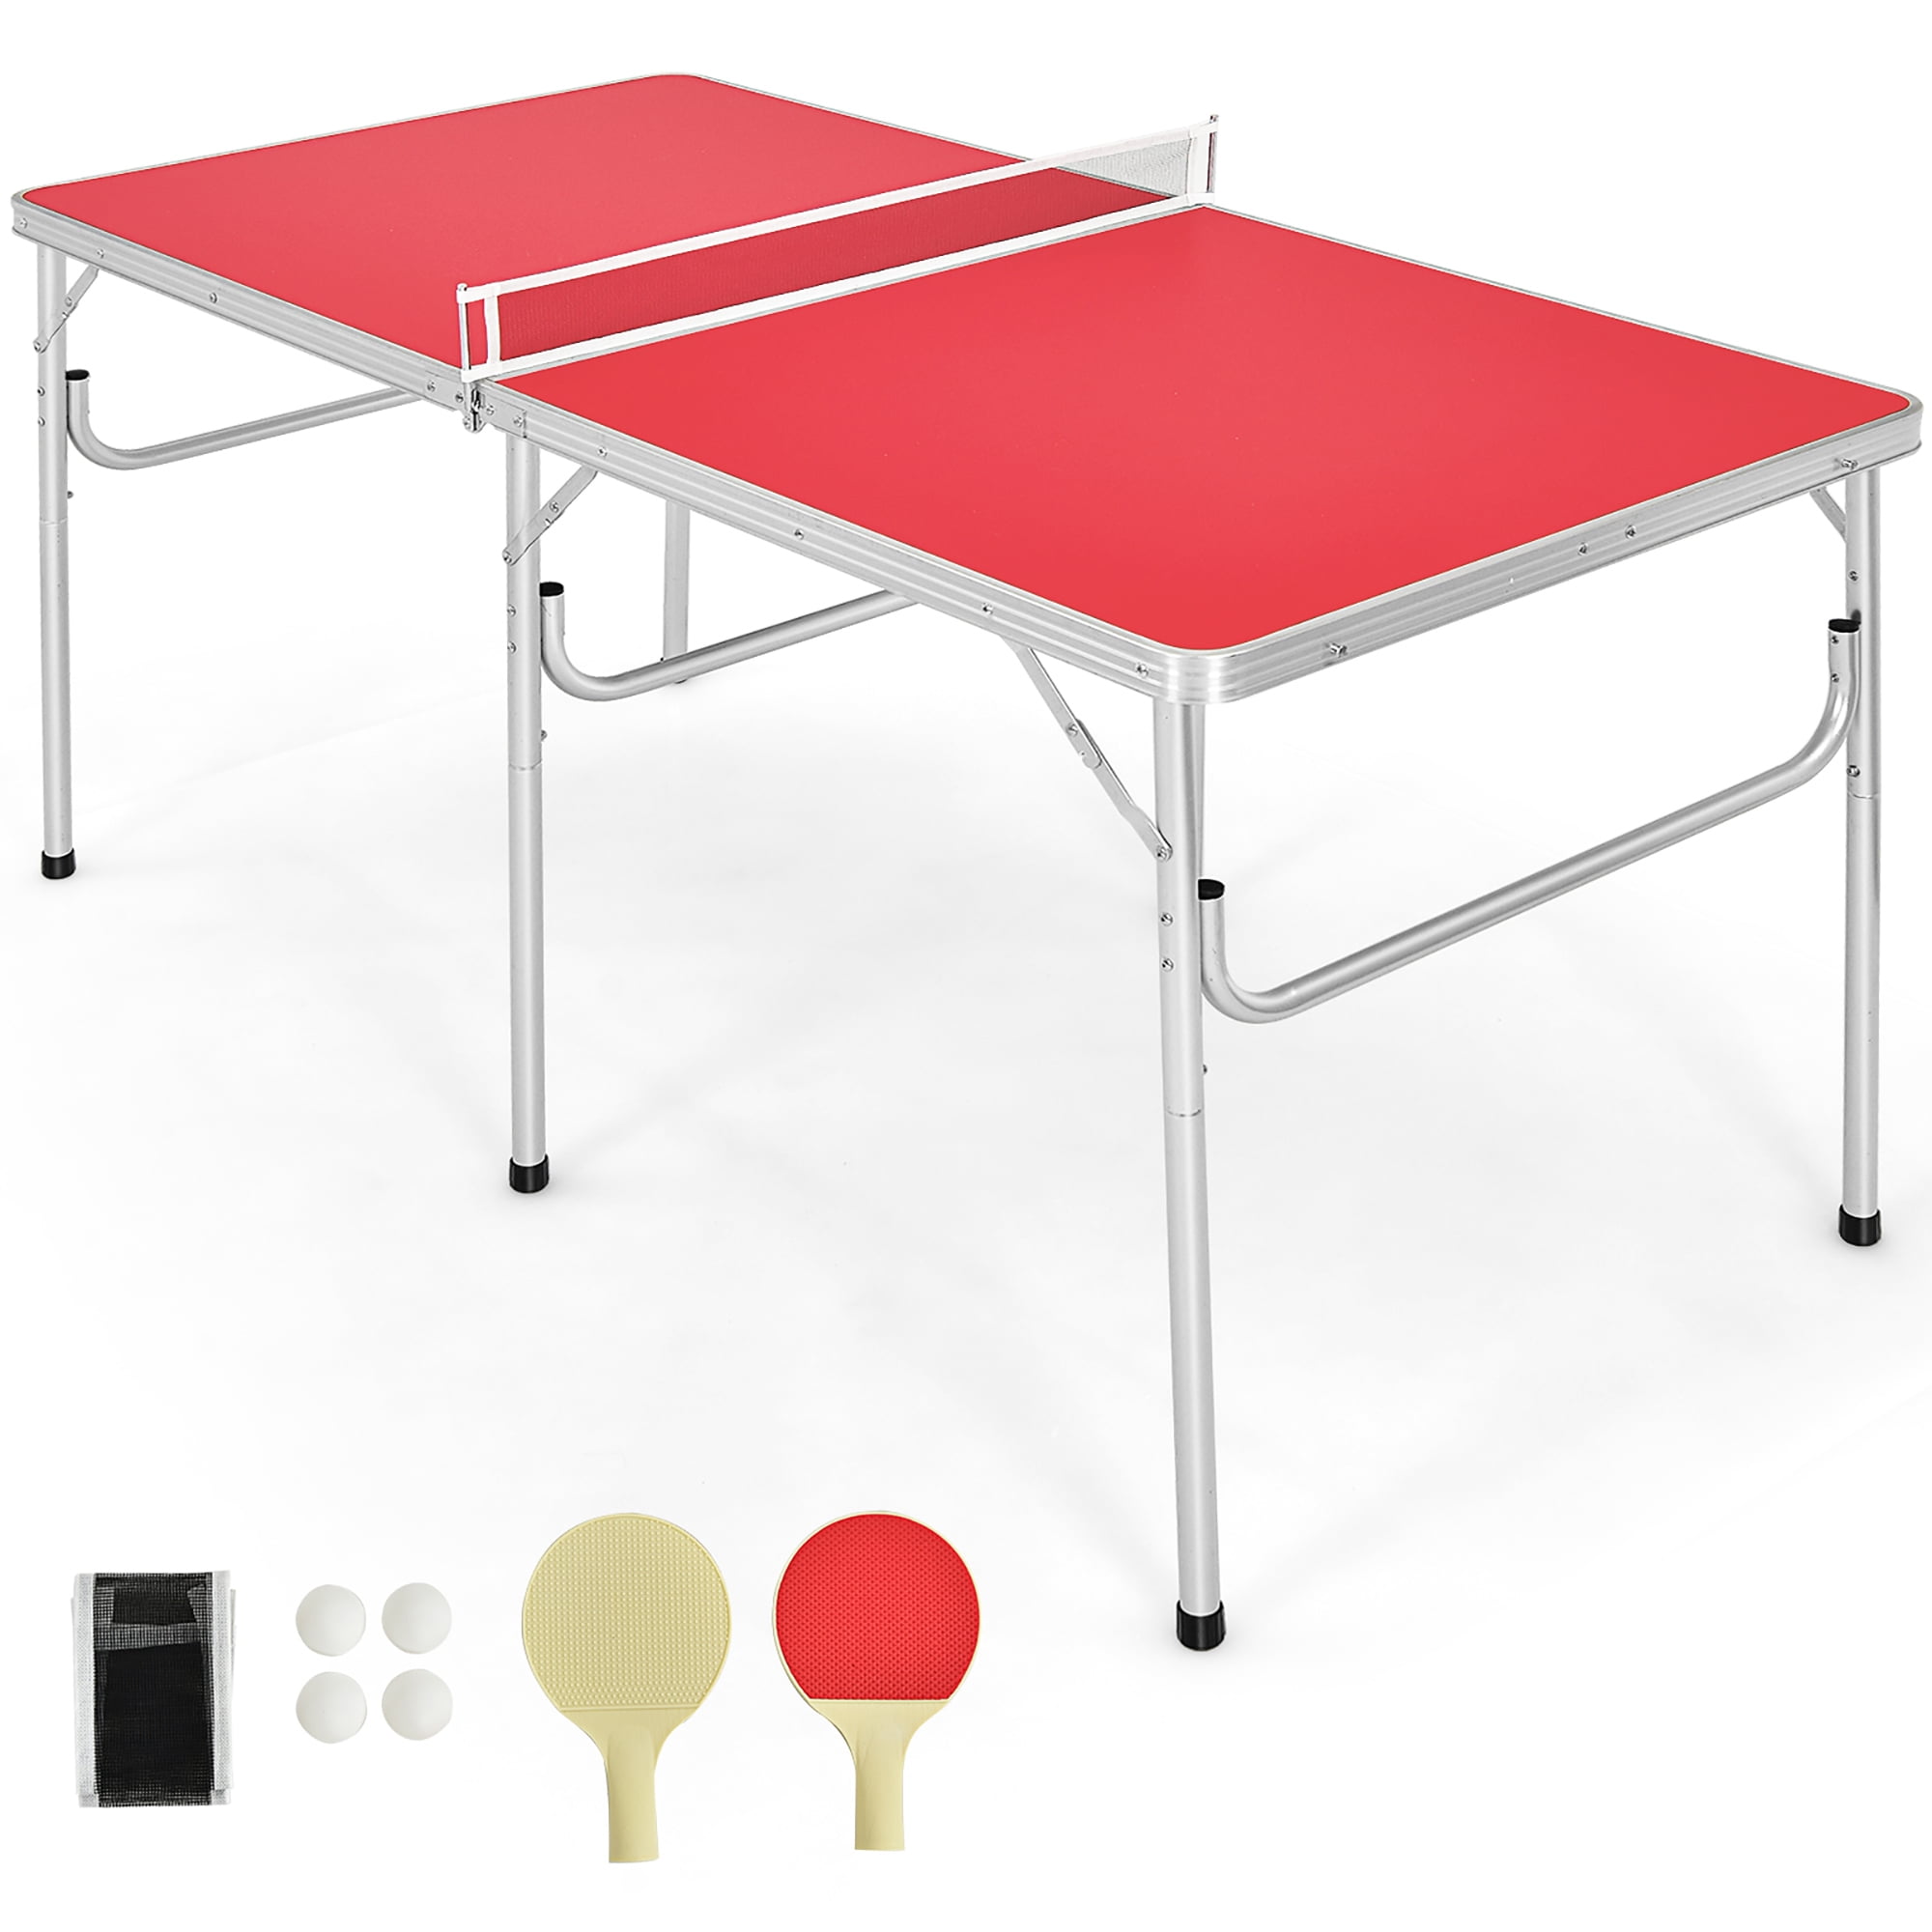 Ubon Foldable Small Size Ping Pong Table-60 x 30 Portable Table Tennis Table with Net/Posts Regulation Height Tennis Table for Indoor Games 